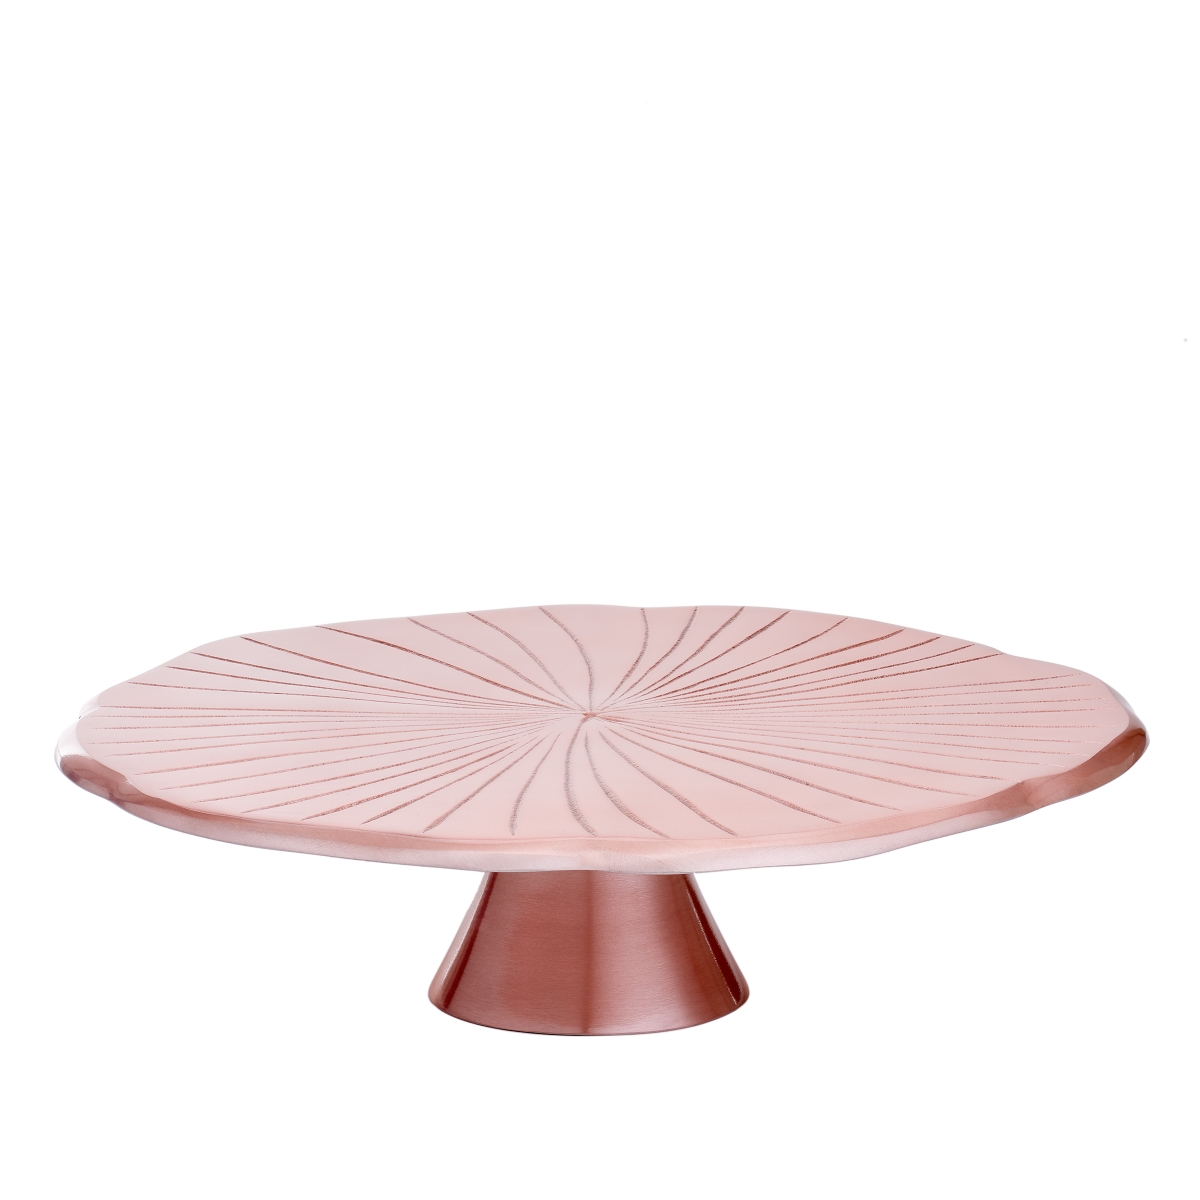 3442rg 12.5 X 3.37 In. Lily Pad Cake Stand, Rose Gold